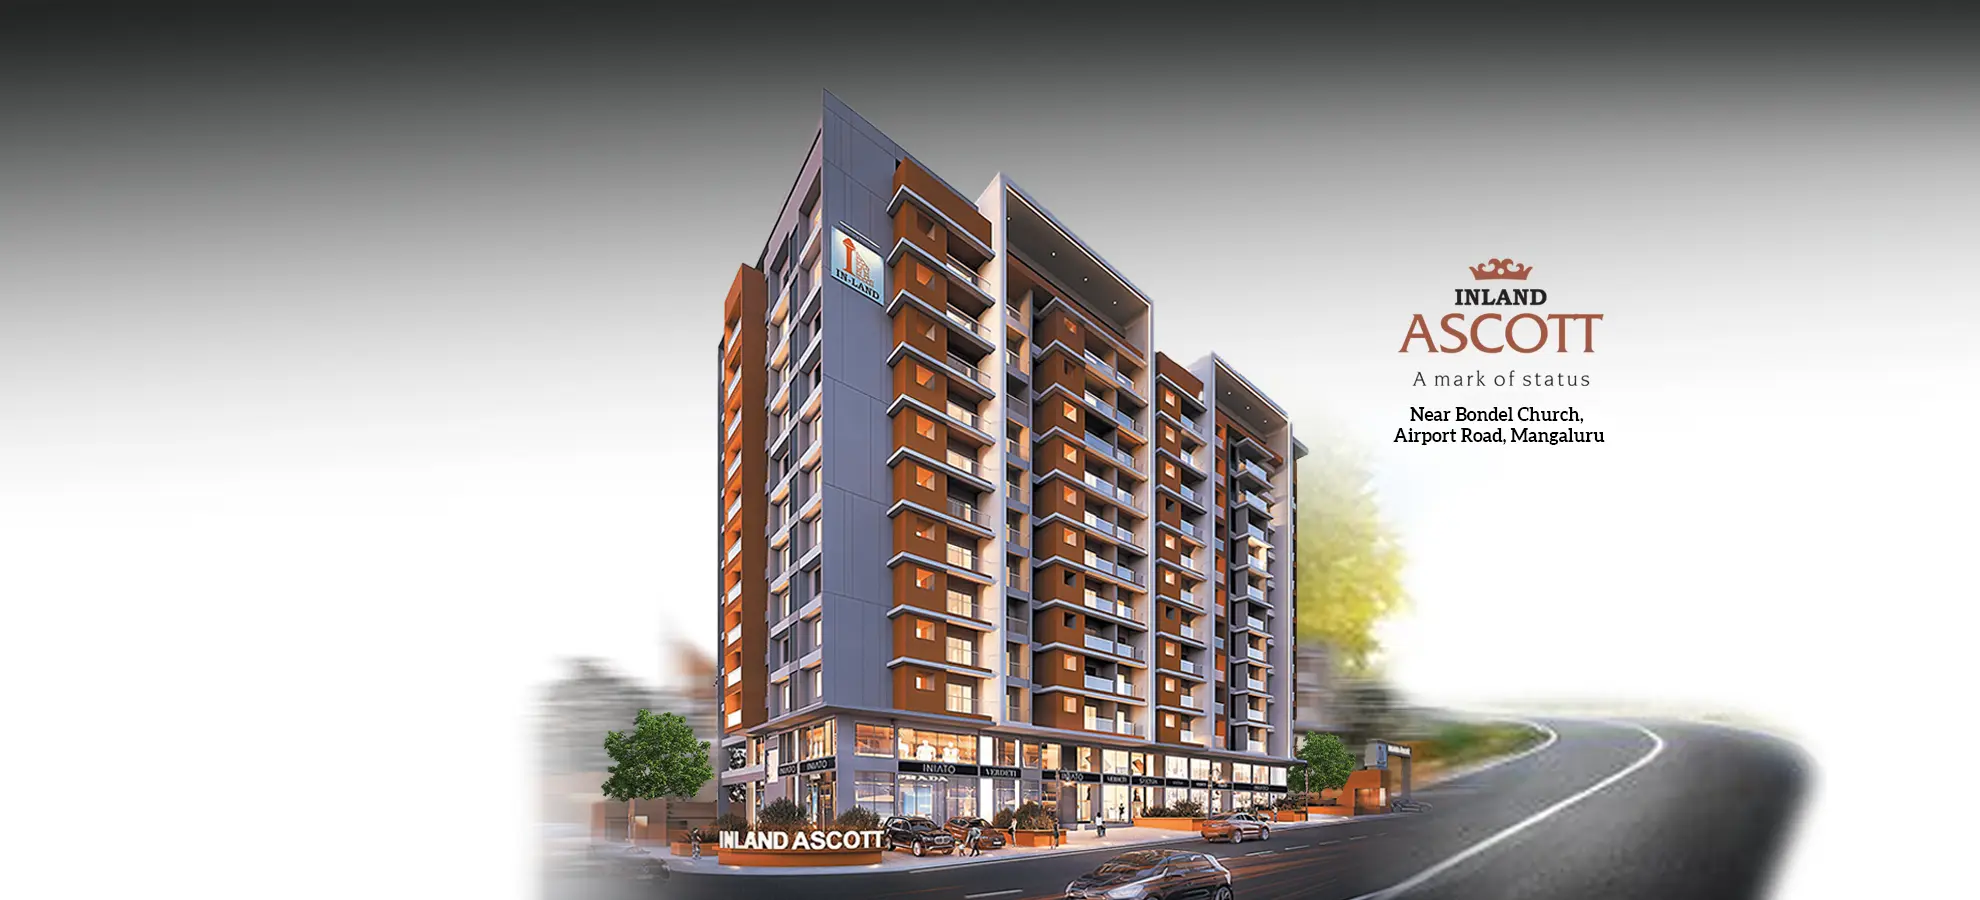 IN-LAND ASCOTT Premium Residential & Commercial Project in Mangalore